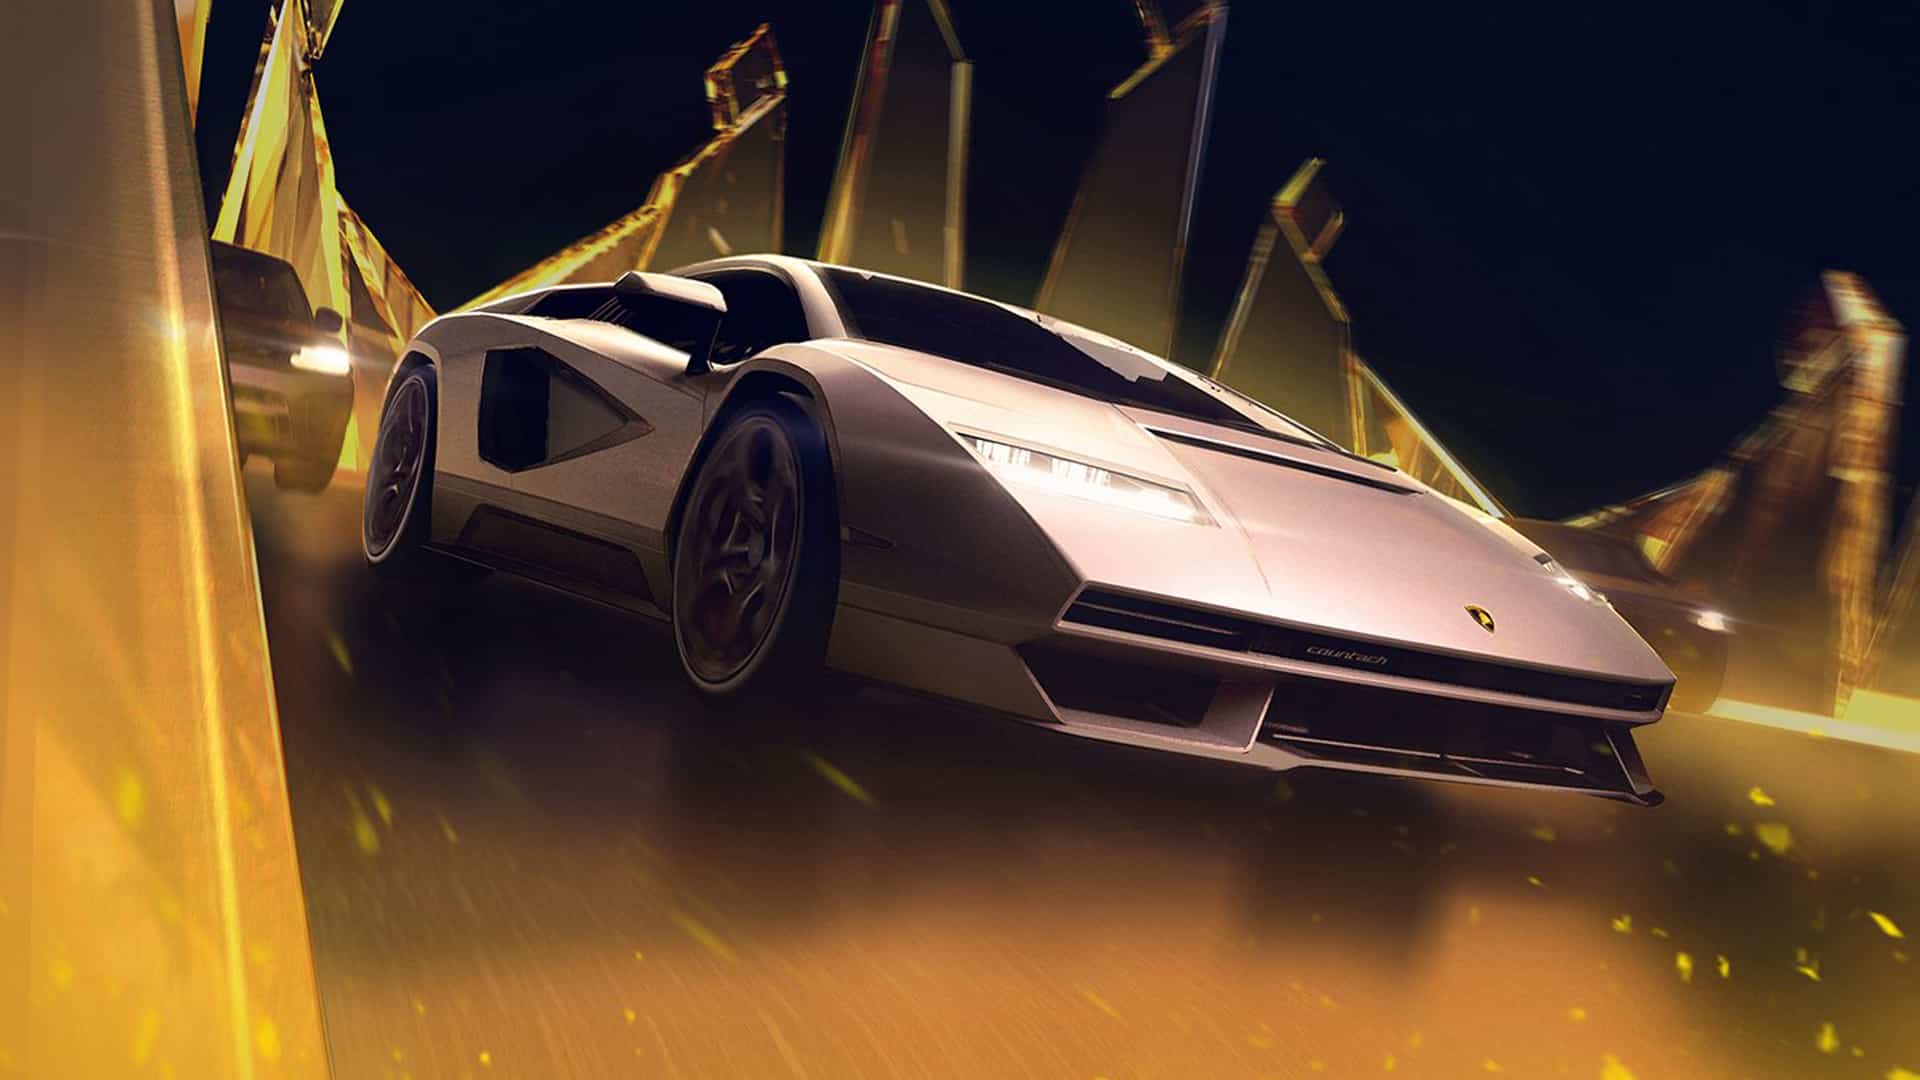 Need for Speed No Limits receives new Lamborghini Countach and music